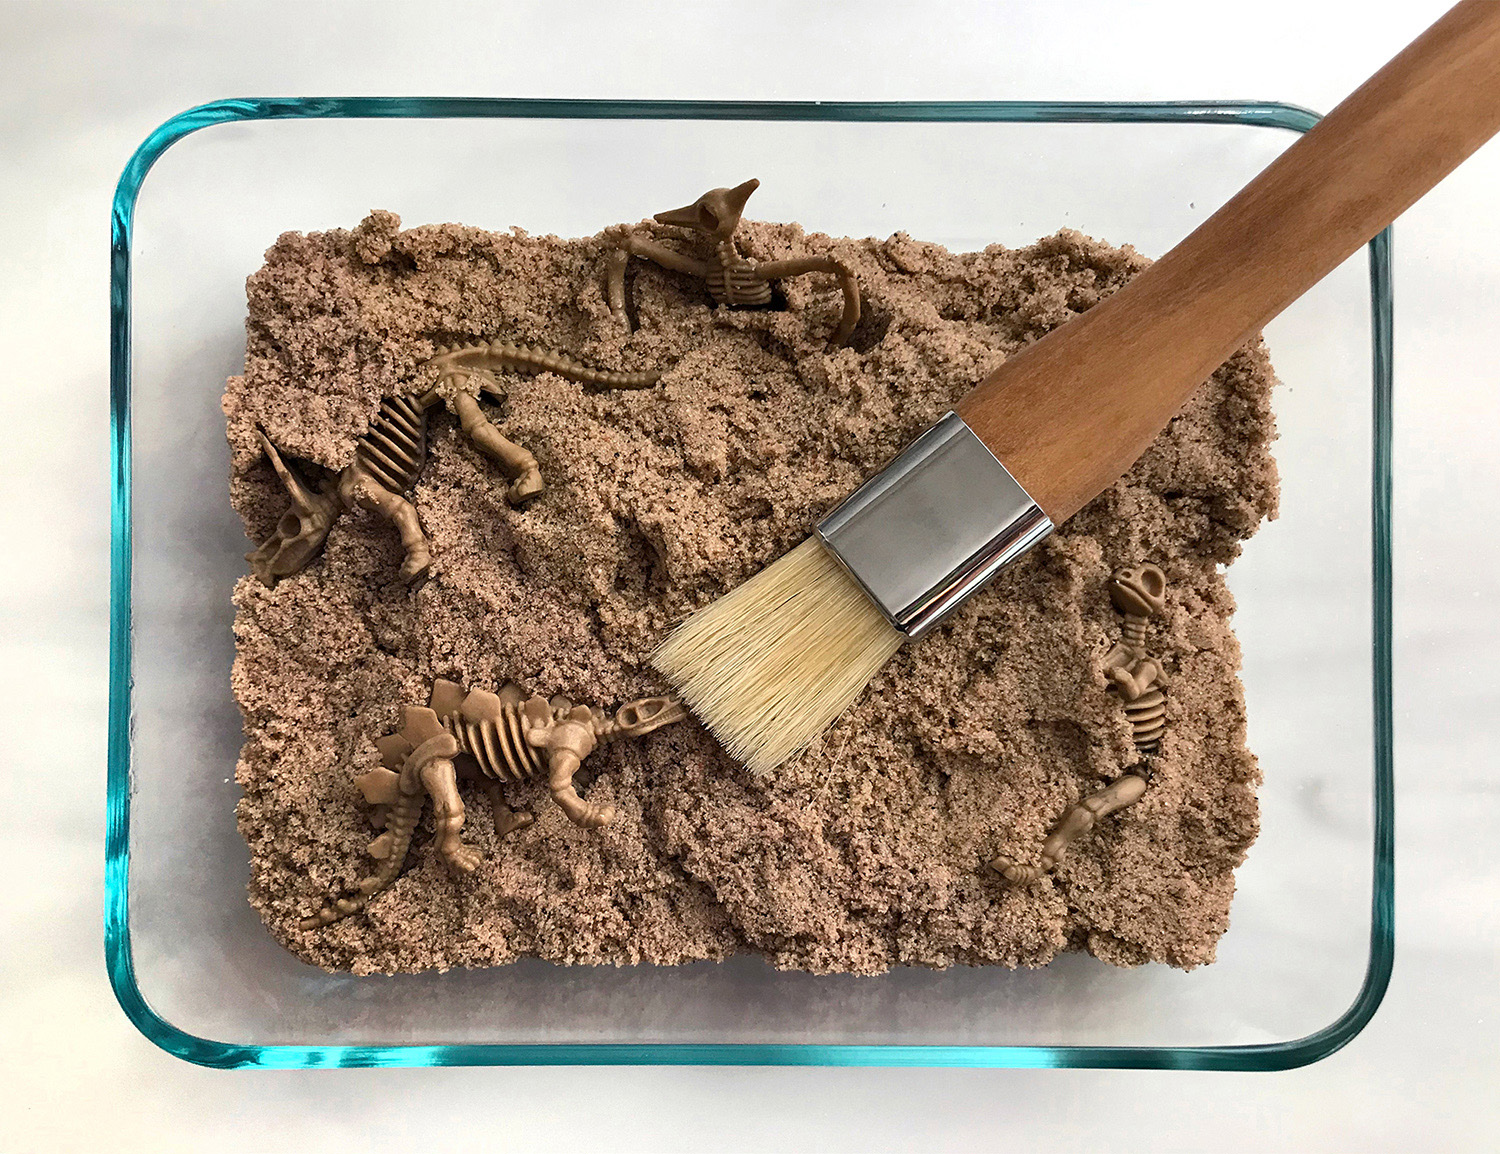 Make a Fossil Excavation Site